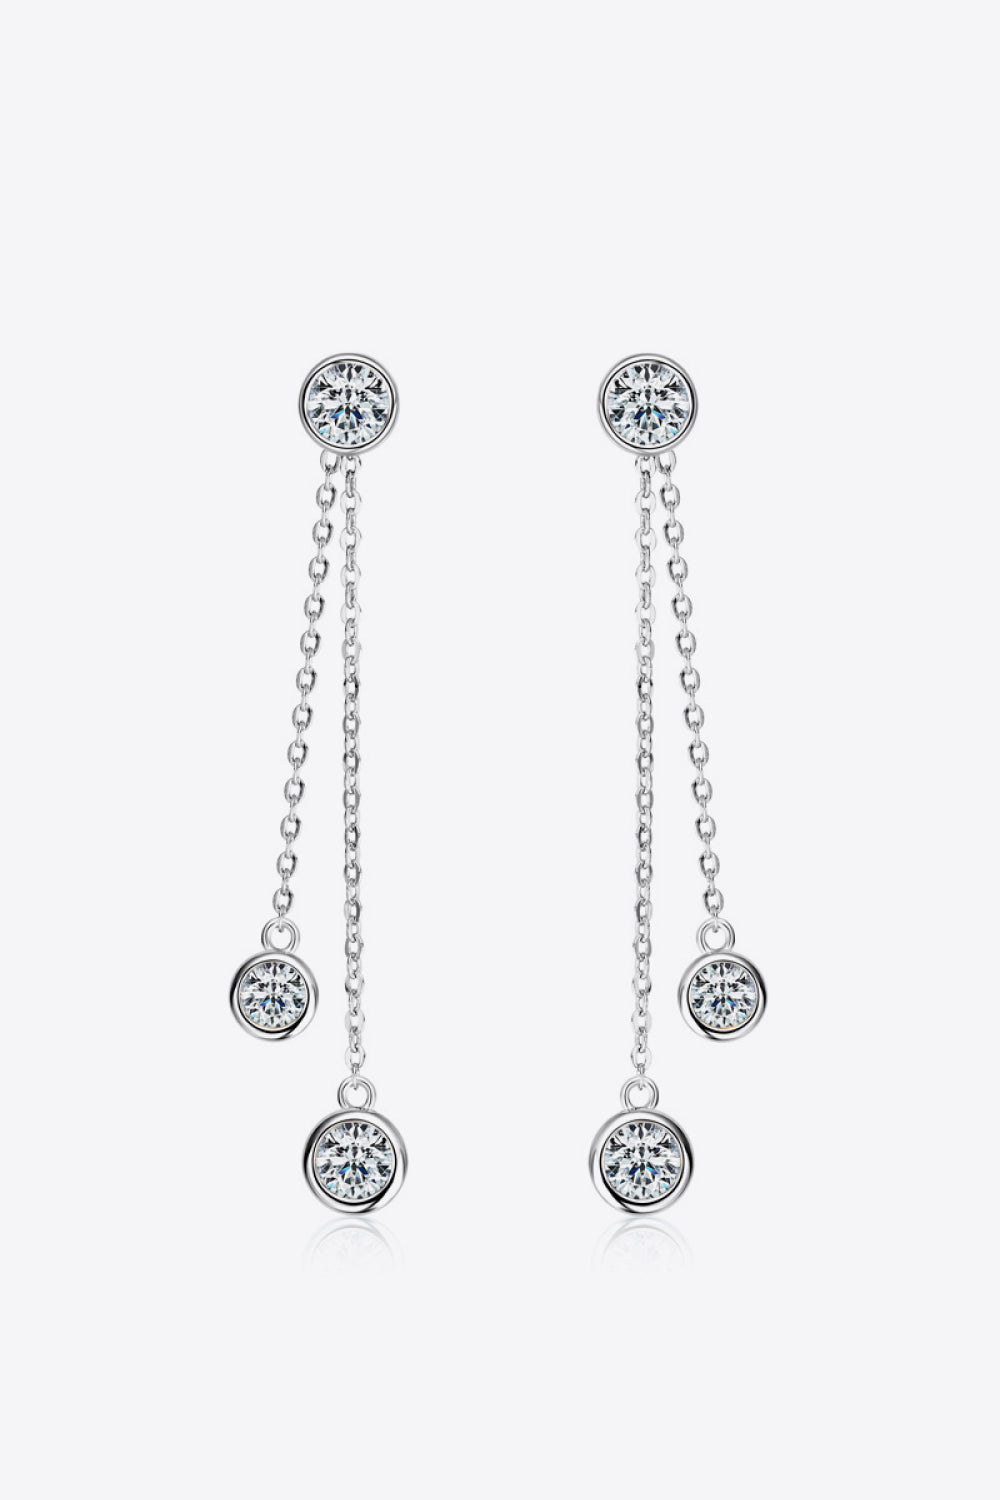 2.6 Carat Moissanite 925 Sterling Silver Earrings apparel & accessories